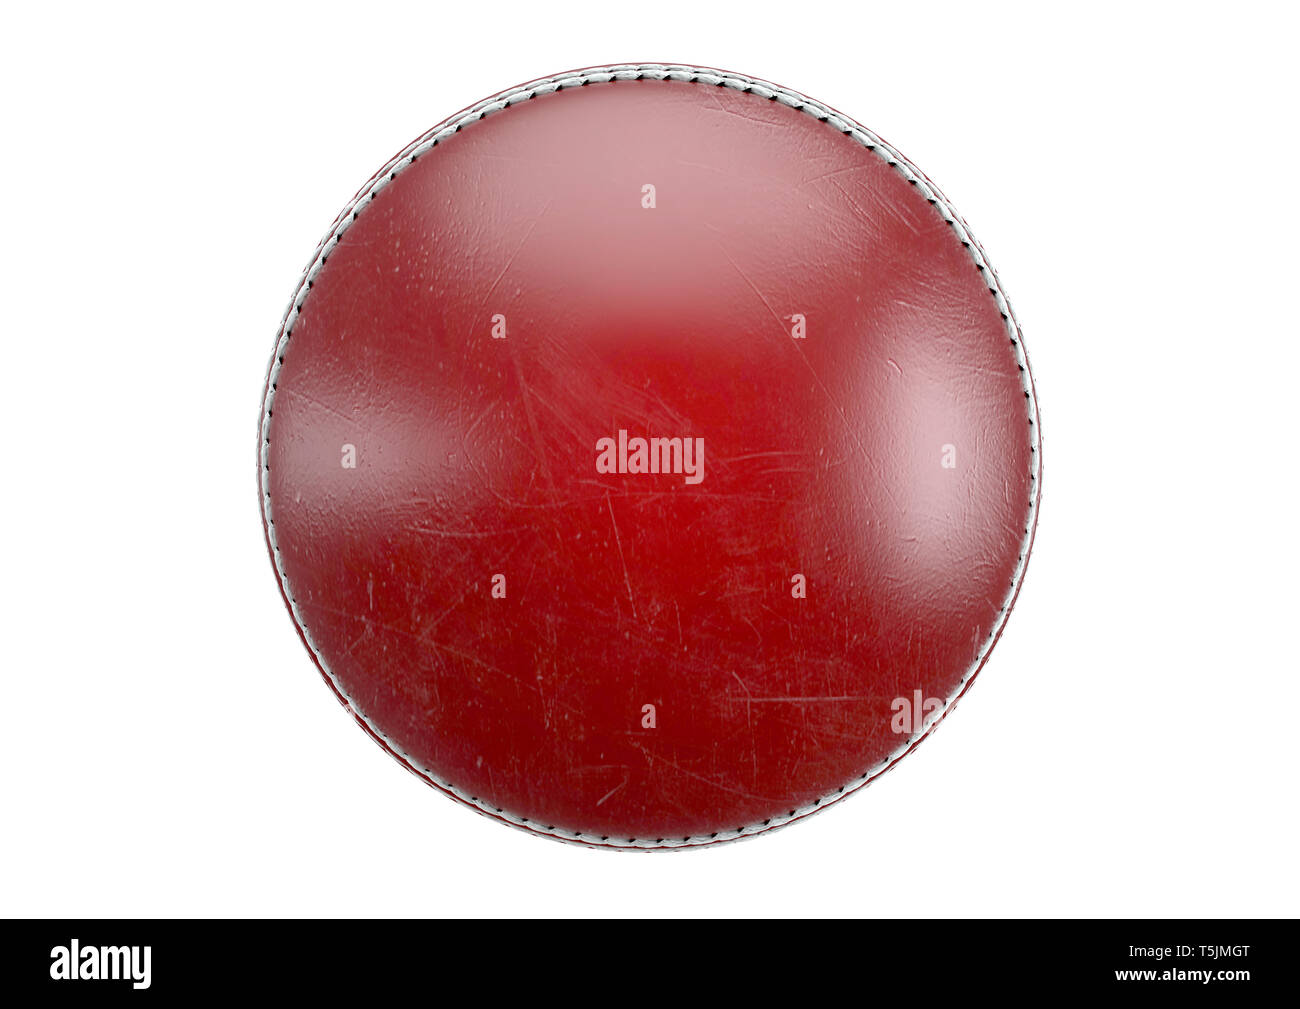 A side view of red cricket ball on an isolated background - 3D render Stock Photo